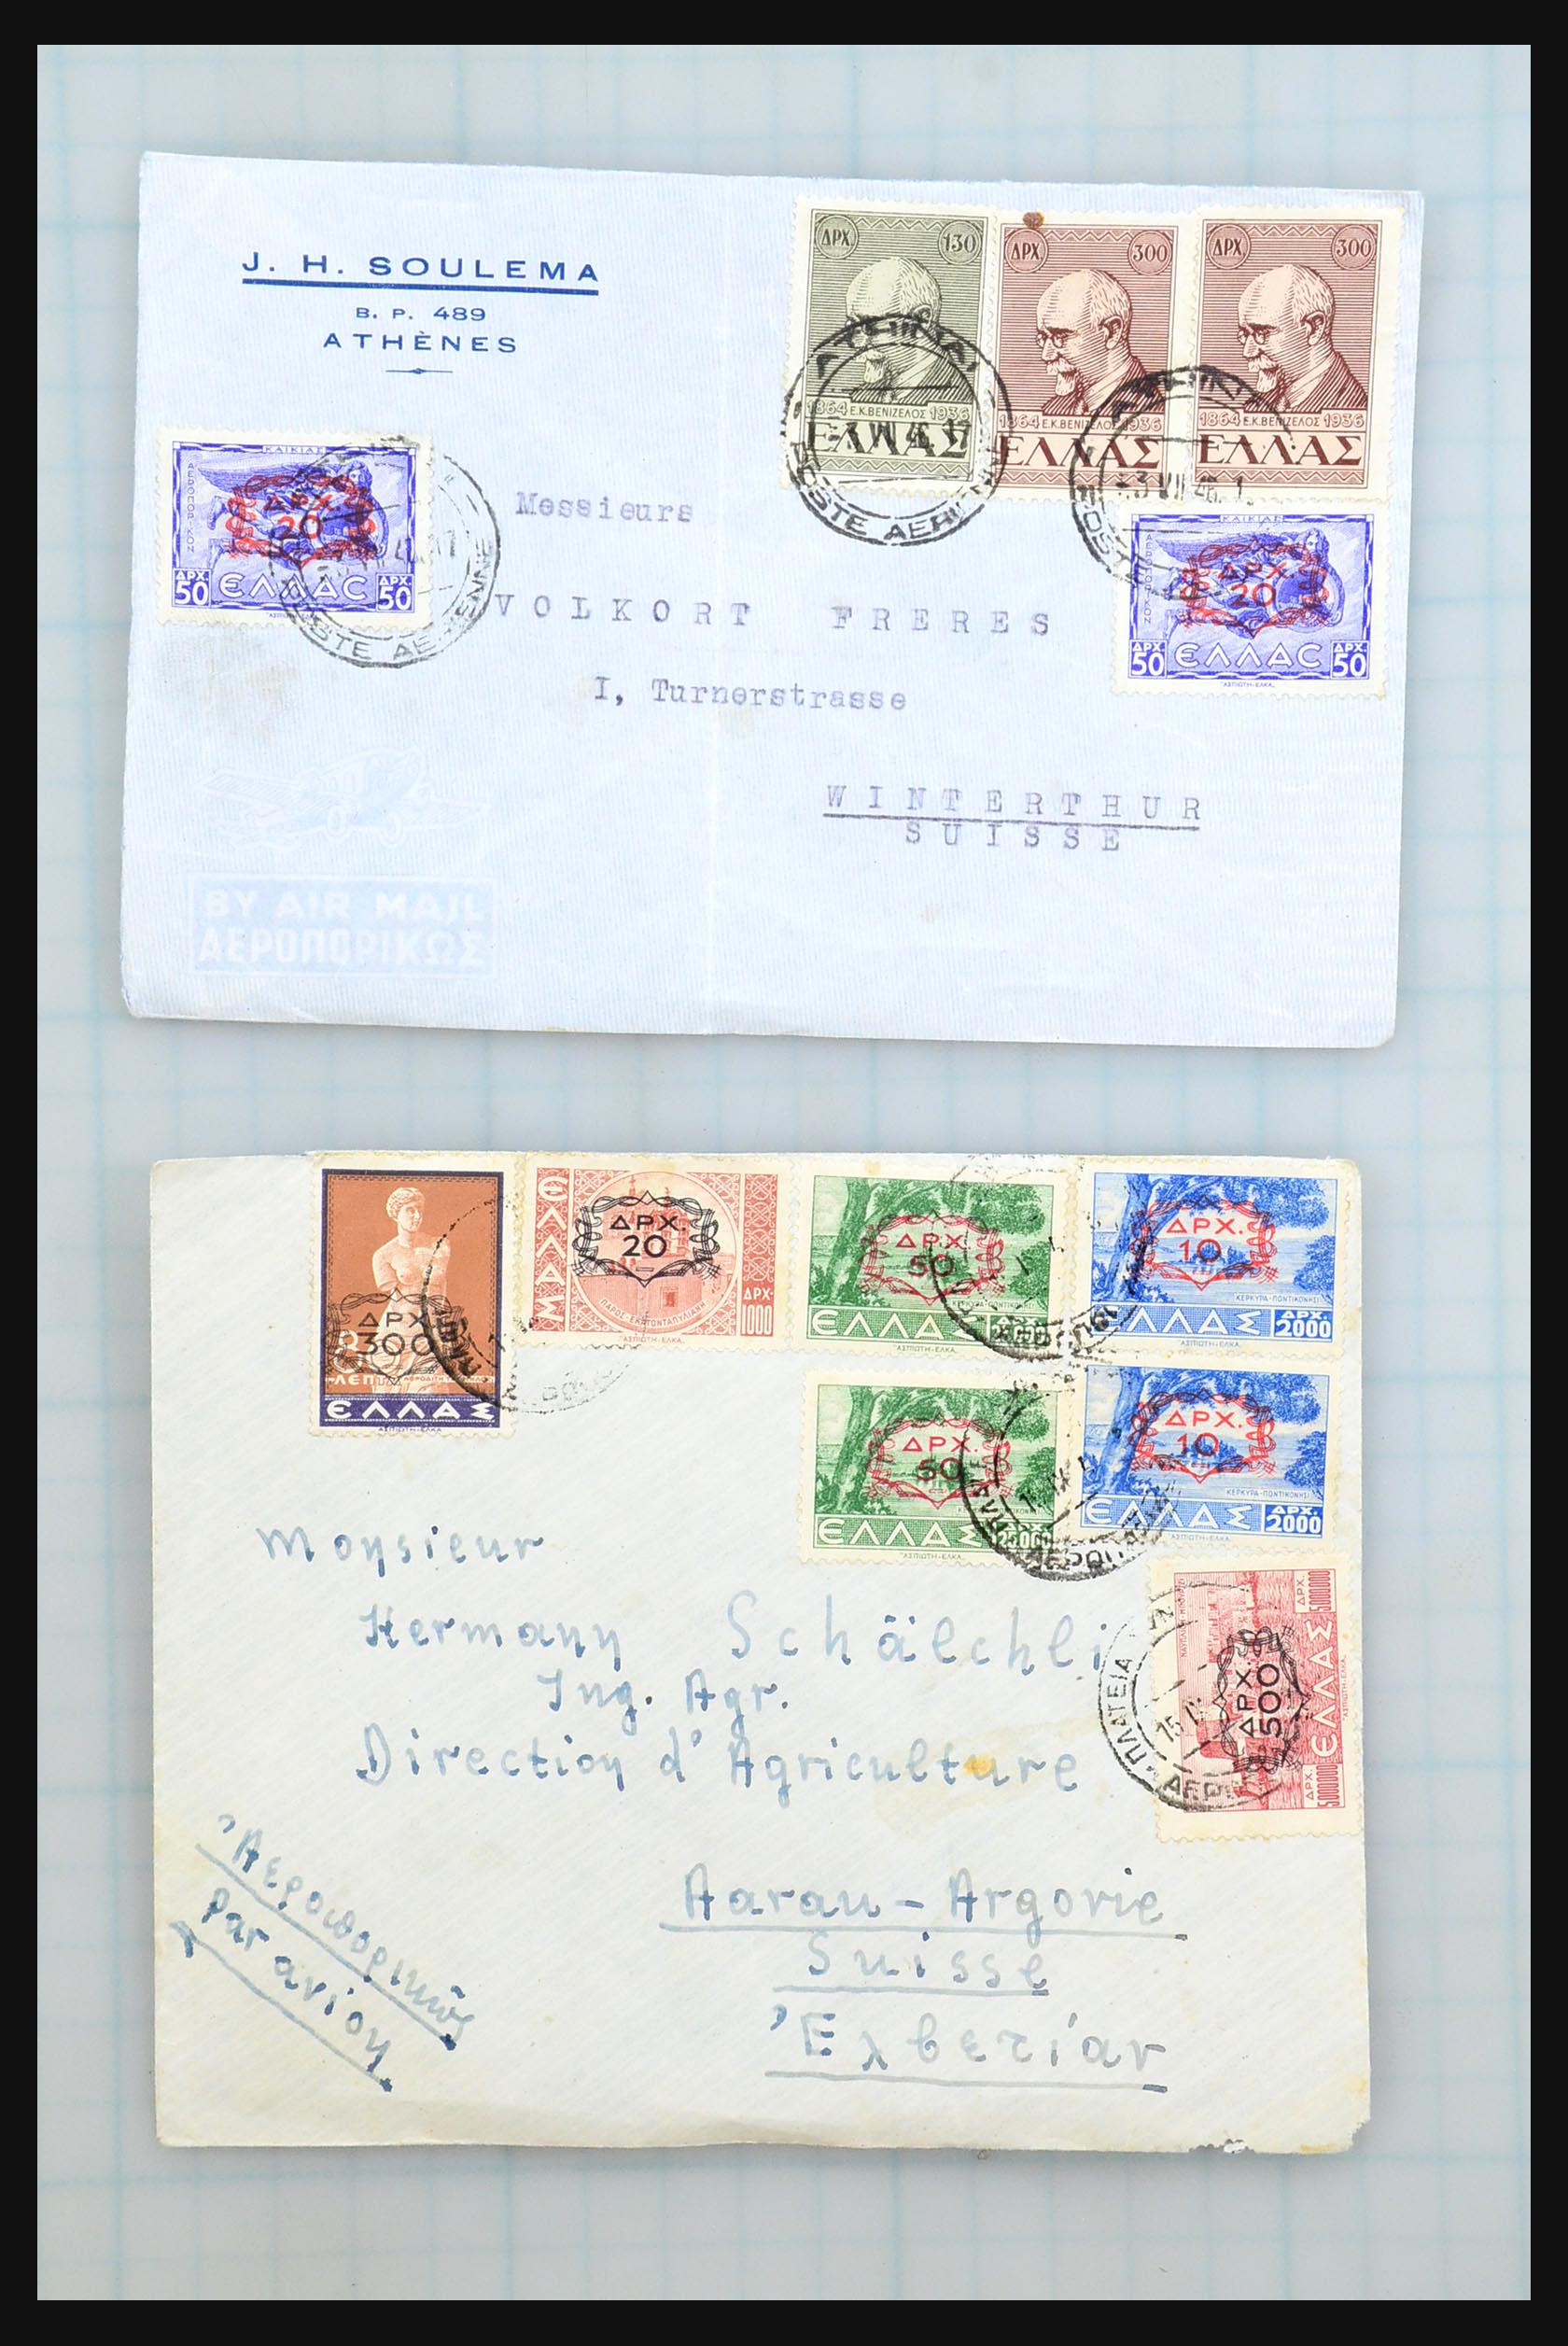 31358 089 - 31358 Portugal/Luxemburg/Greece covers 1880-1960.